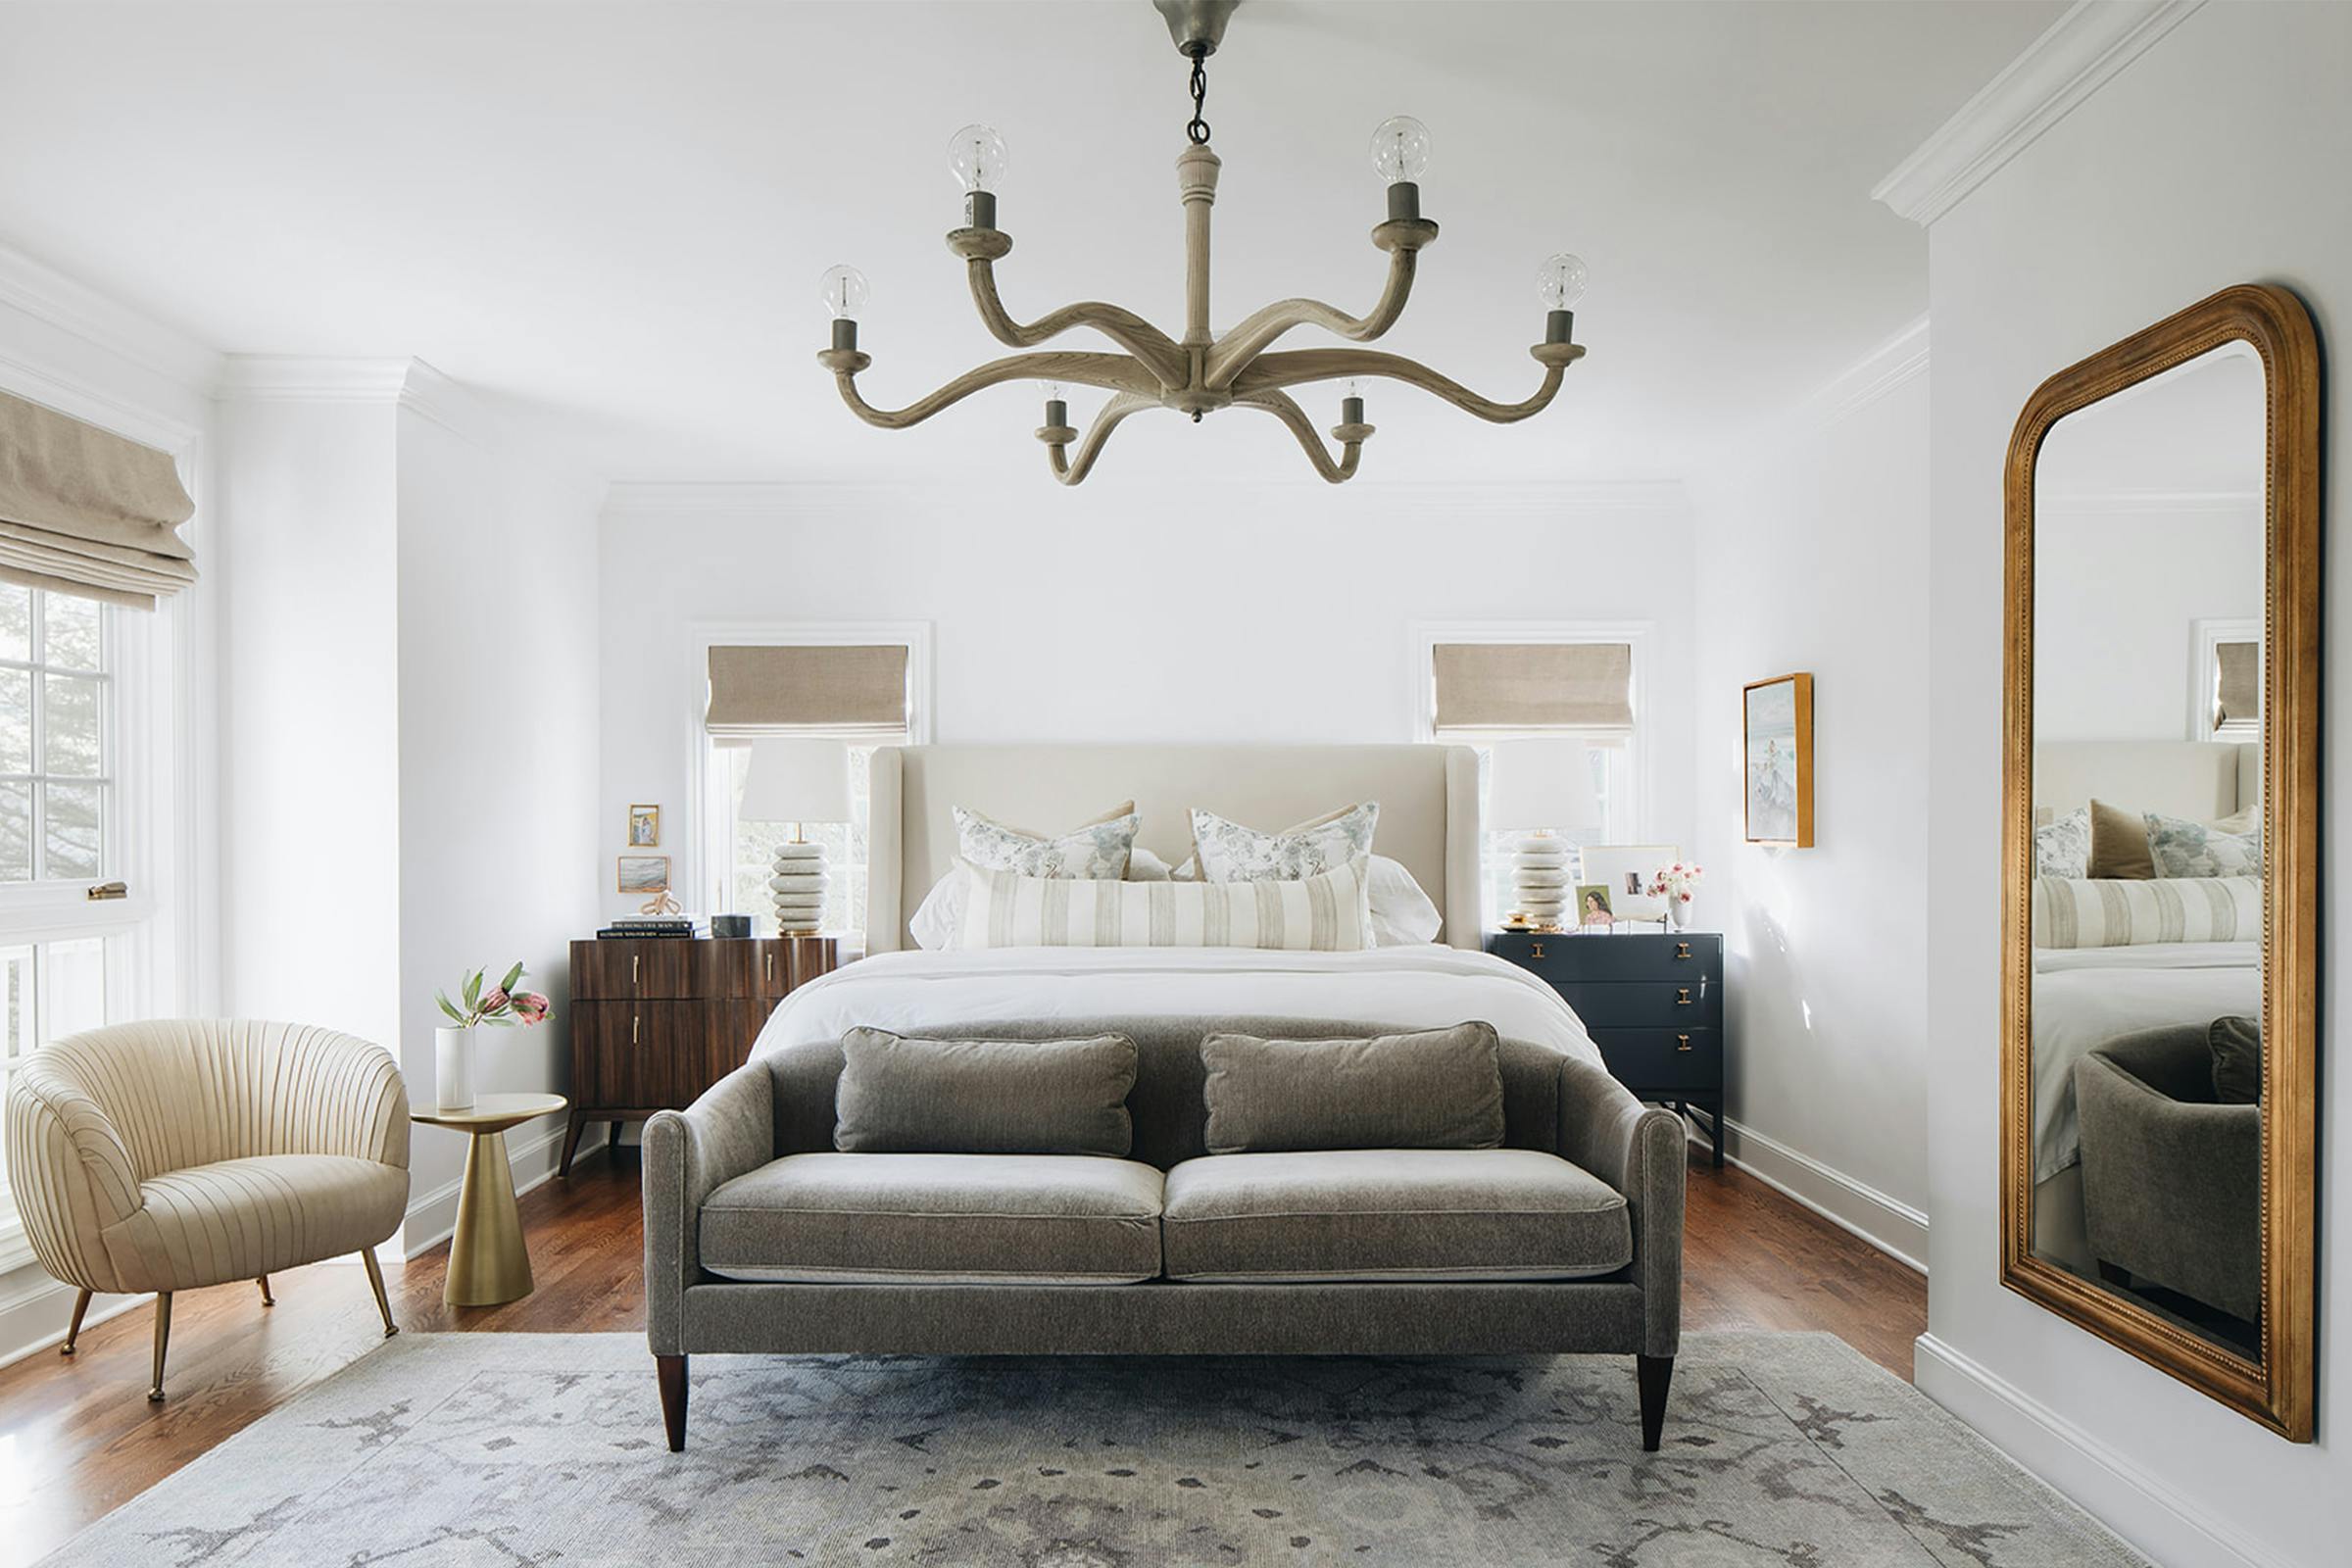 Nicole-Green-Design-Project-Chevy-Chase-Historic-East-Coast-Home-Main-Bedroom